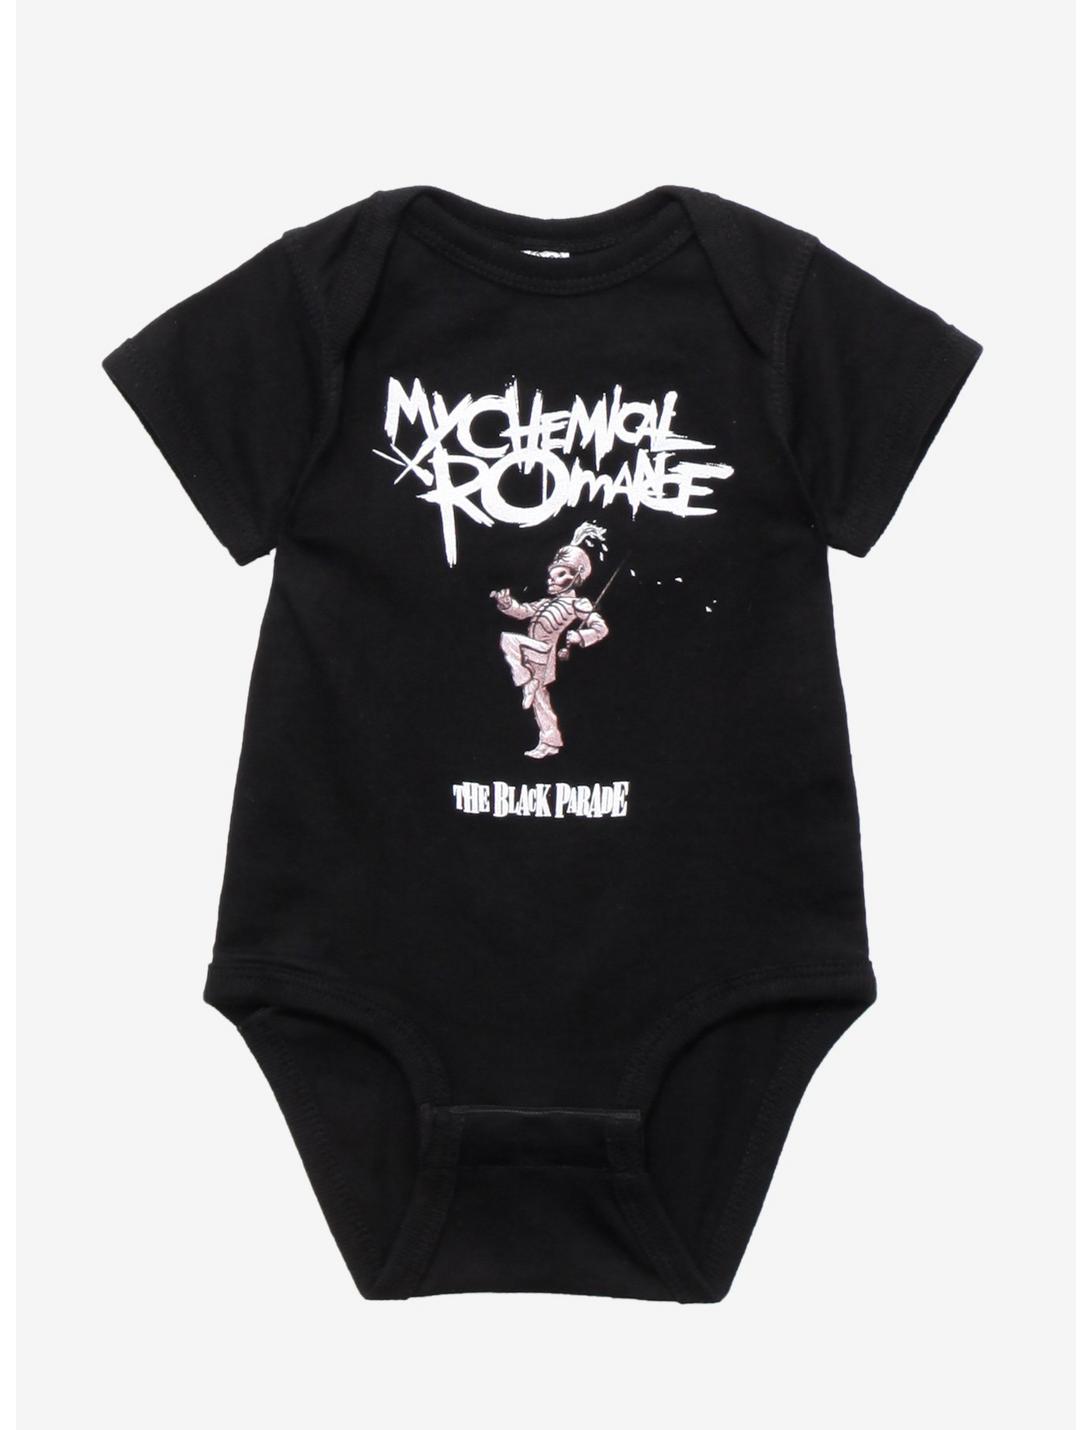 Hot Topic My Chemical Romance The Black Parade Infant Bodysuit Black 3MONTH